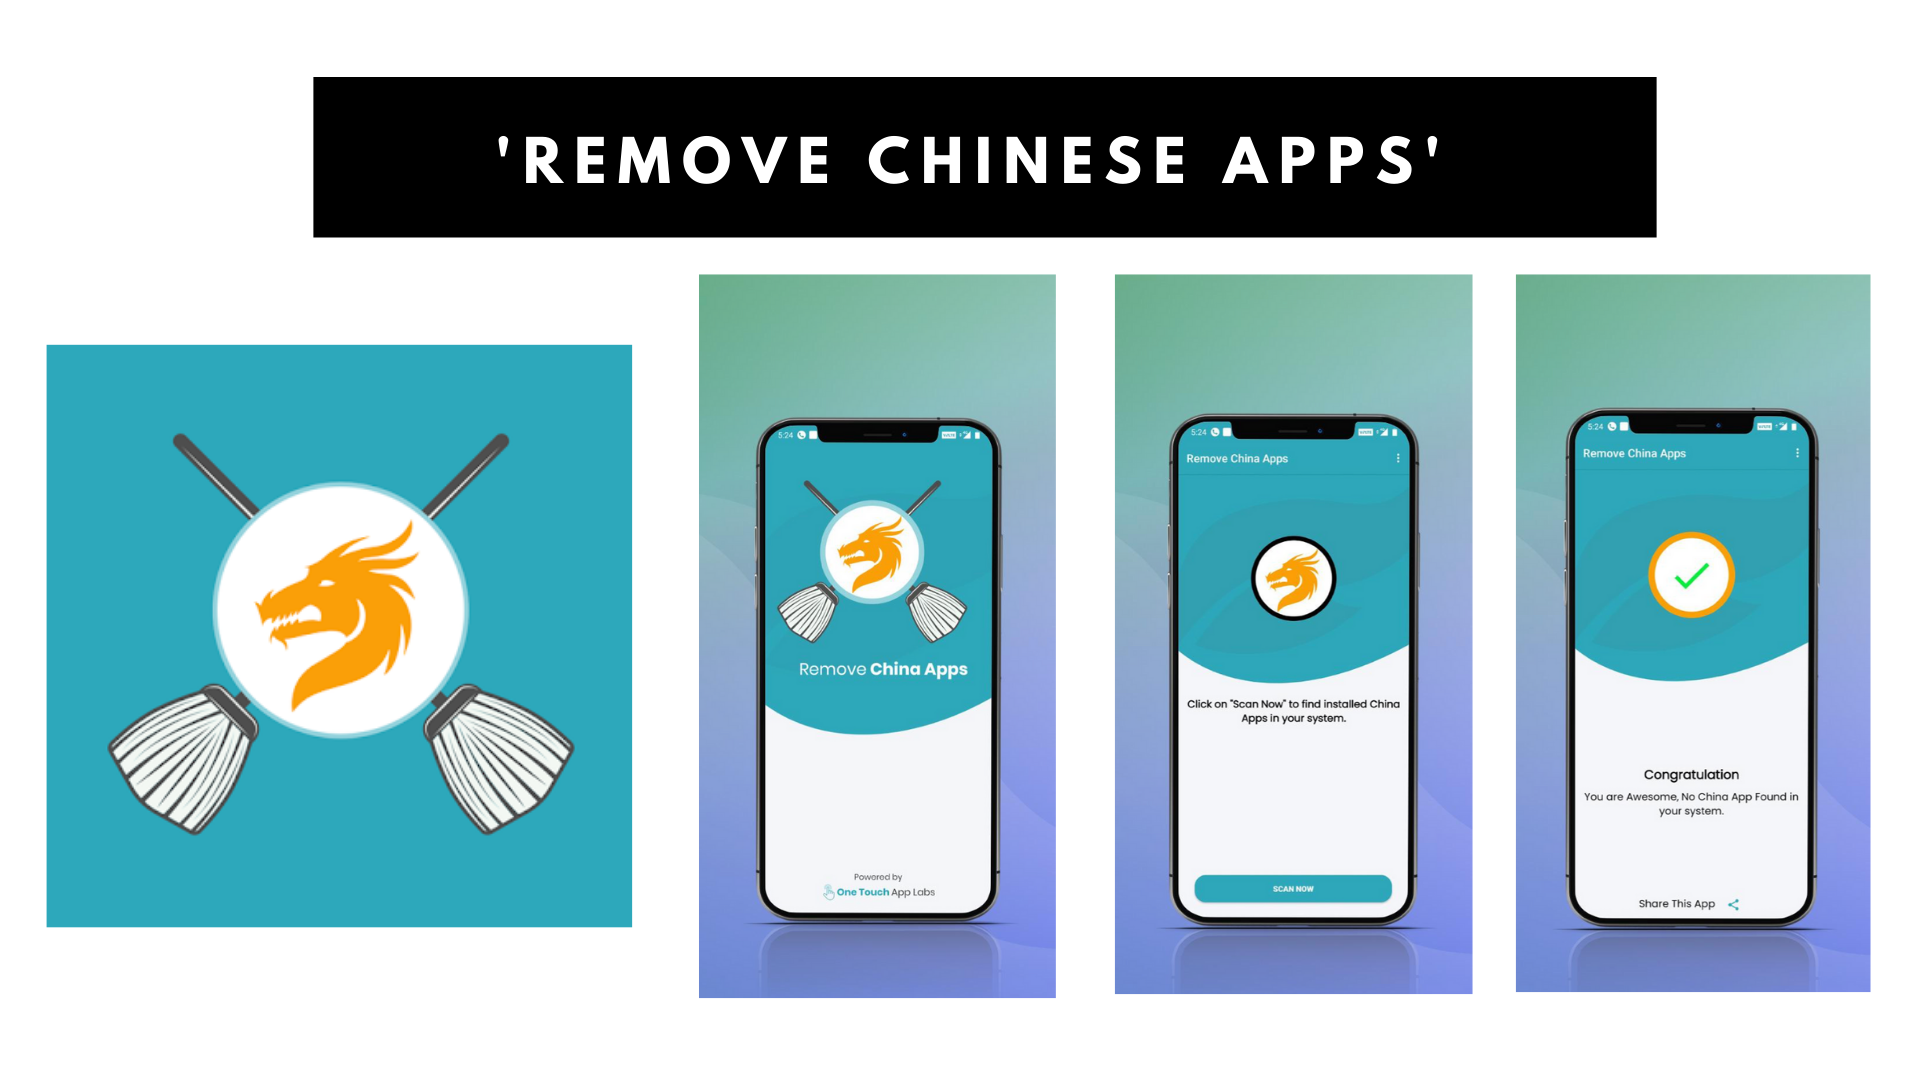 REMOVE CHINESE APPS